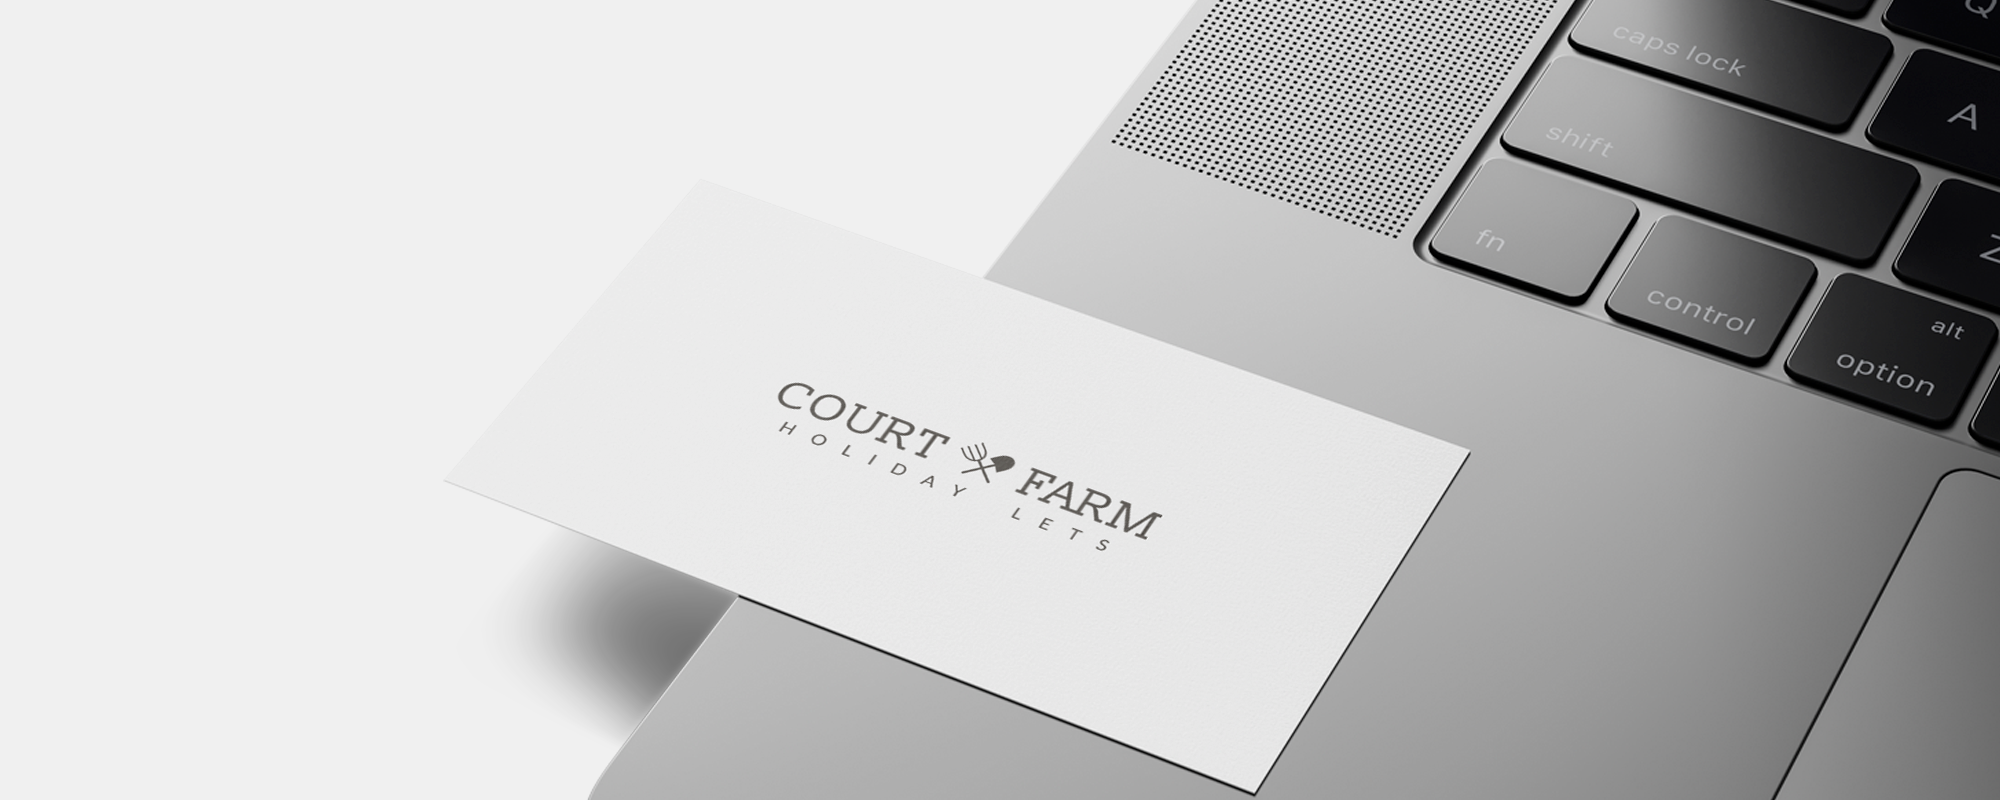 court farm business card with thier new agricultural branding logo on, sitting on the side of a laptop